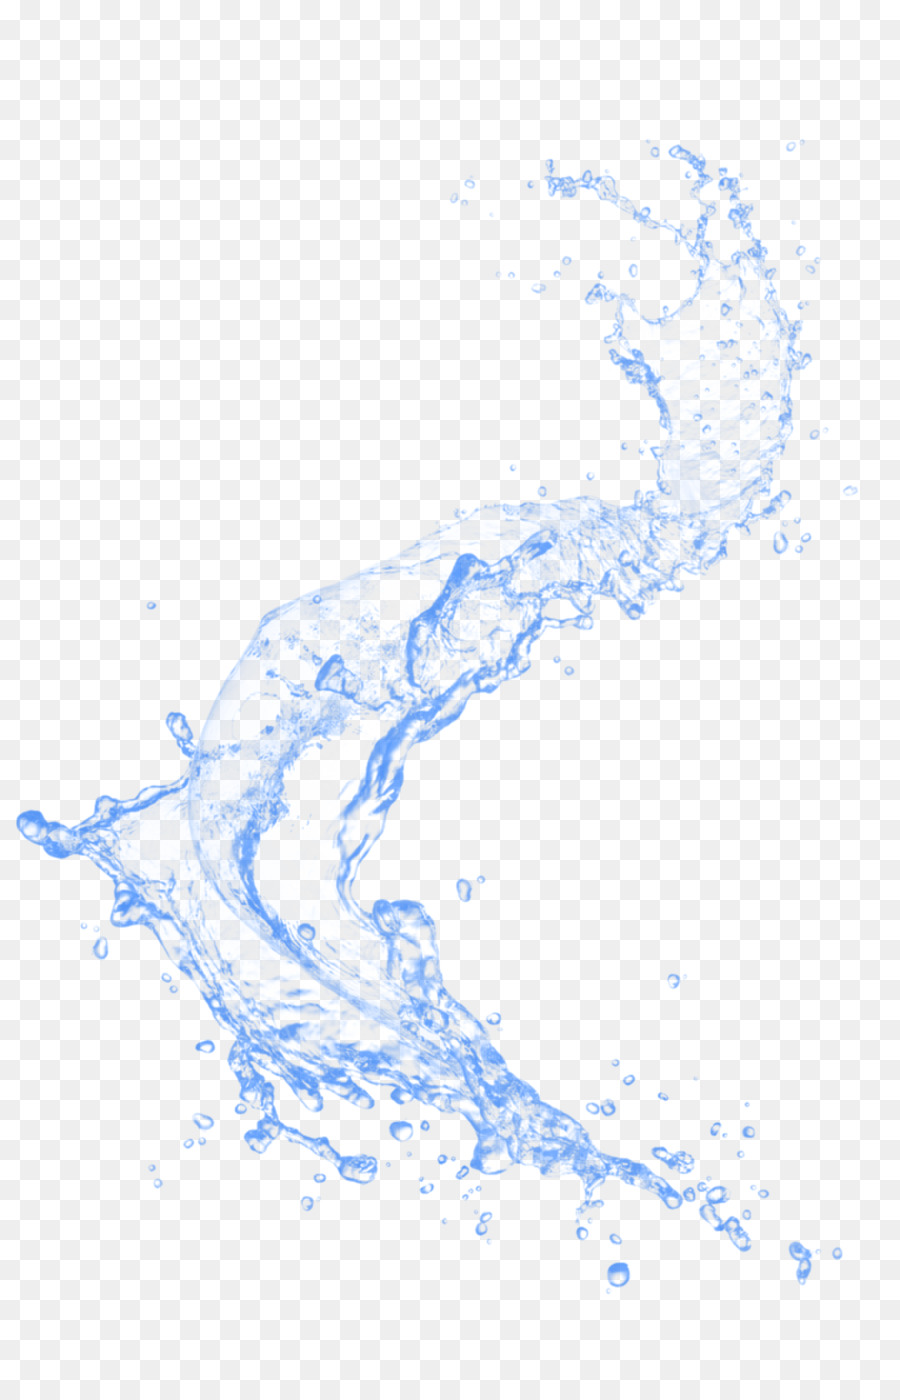 Water Stock photography - water splash png download - 1245*1920 - Free Transparent Water png Download.